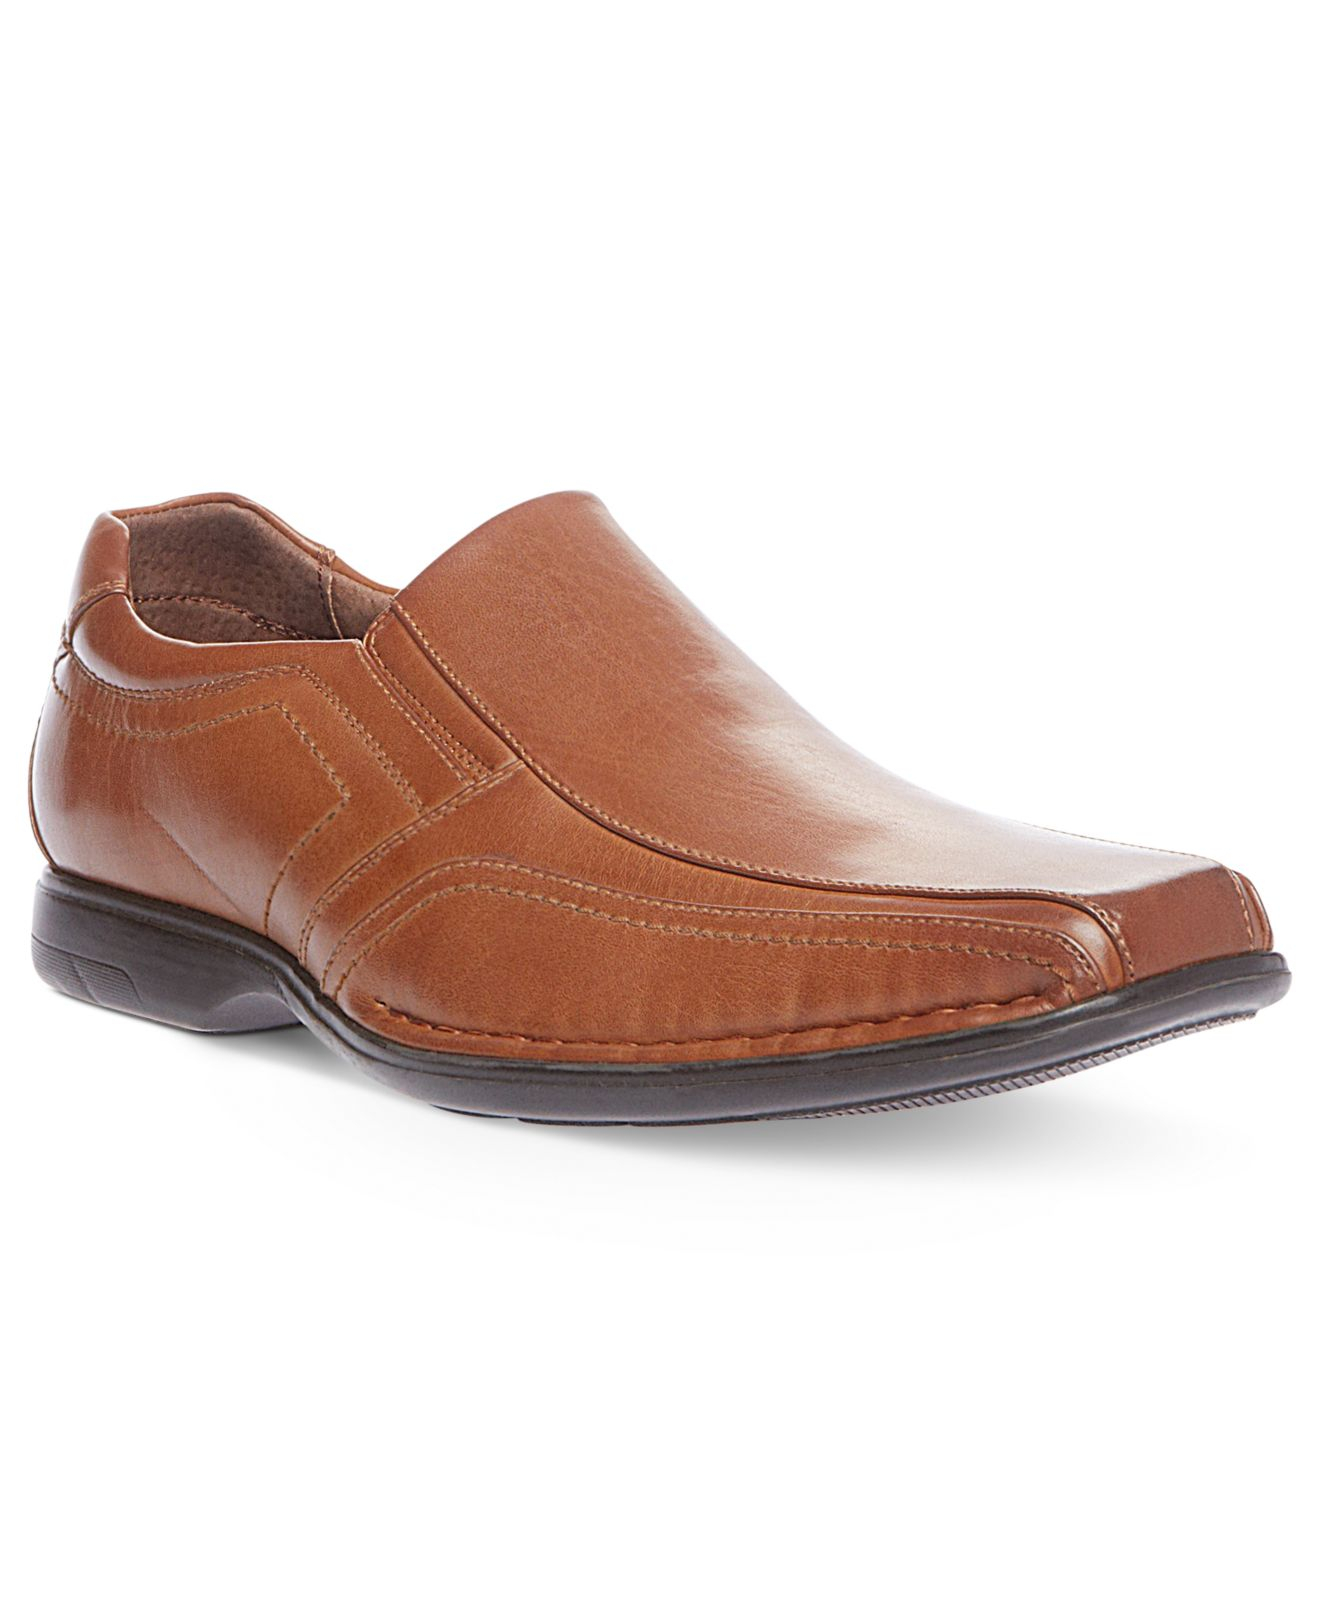 Steve Madden, Shoes, Vintage Steve Madden Mens Brown Leather Shoes With  Suede In Tan And Brown